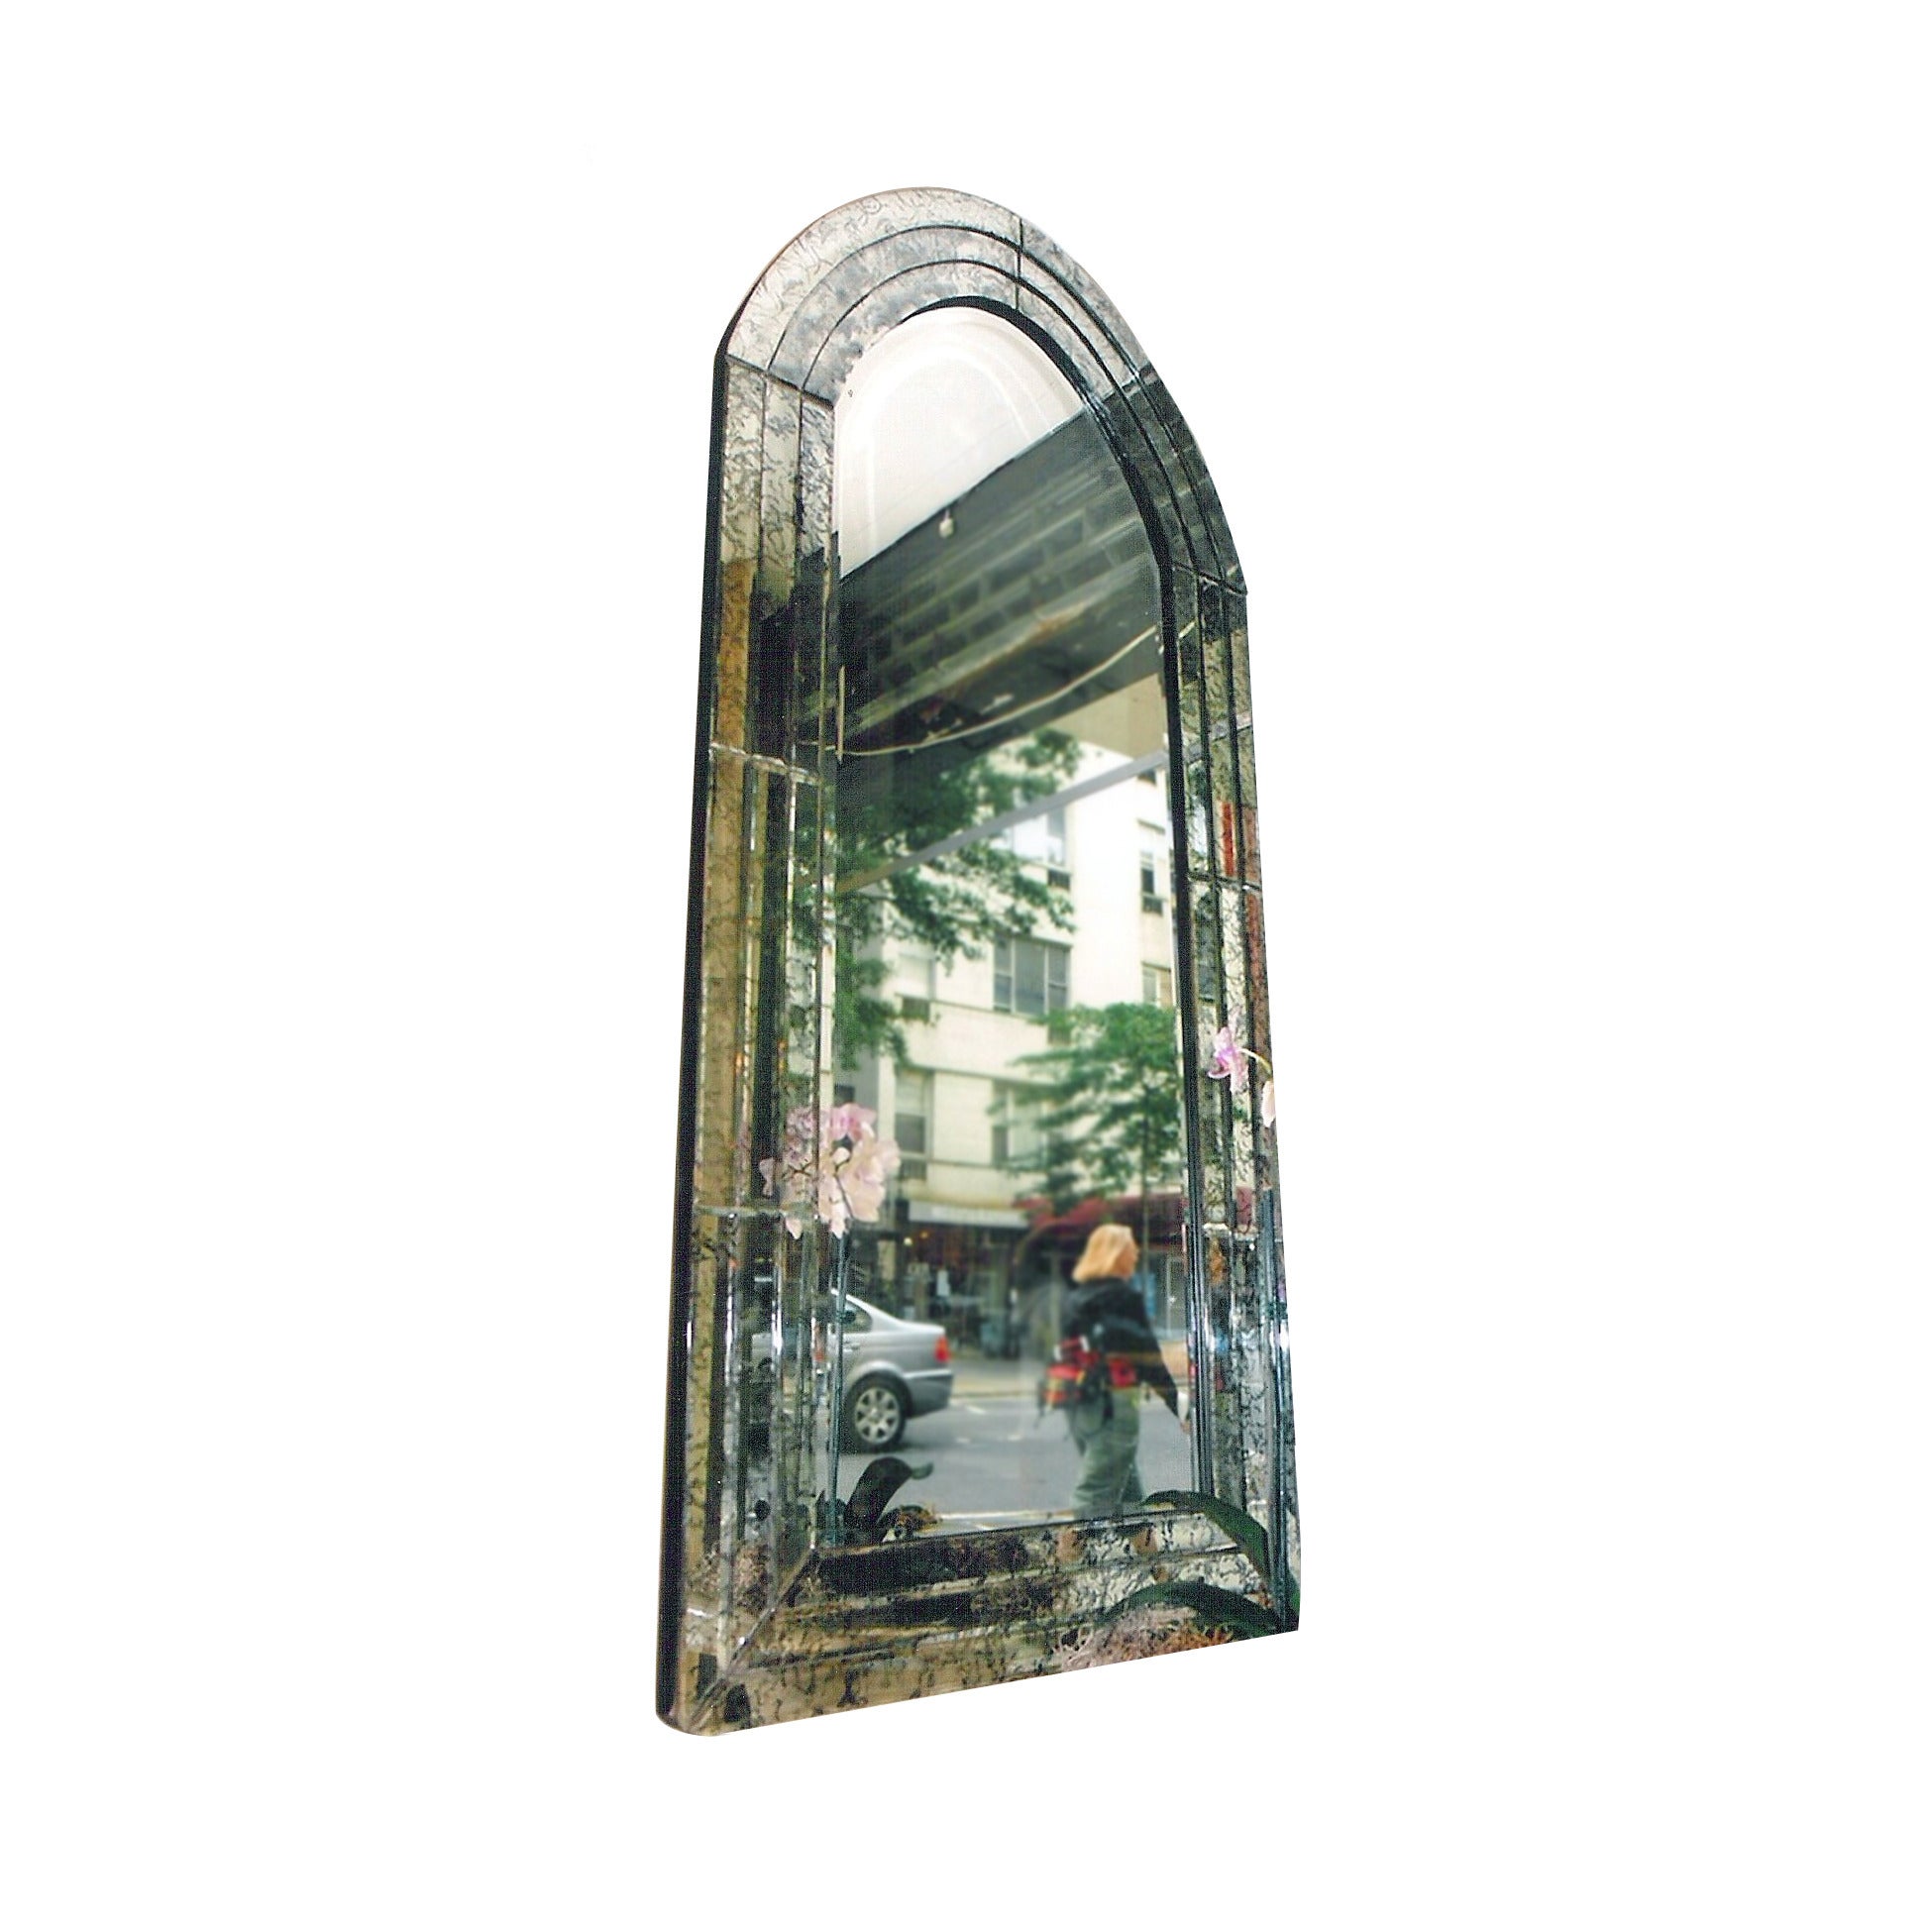 Pair of circa 1940s Italian arched top beveled mirrors, with a three layer patinated mirror frame, wooden back.
Measurements:
Wide: 27.5